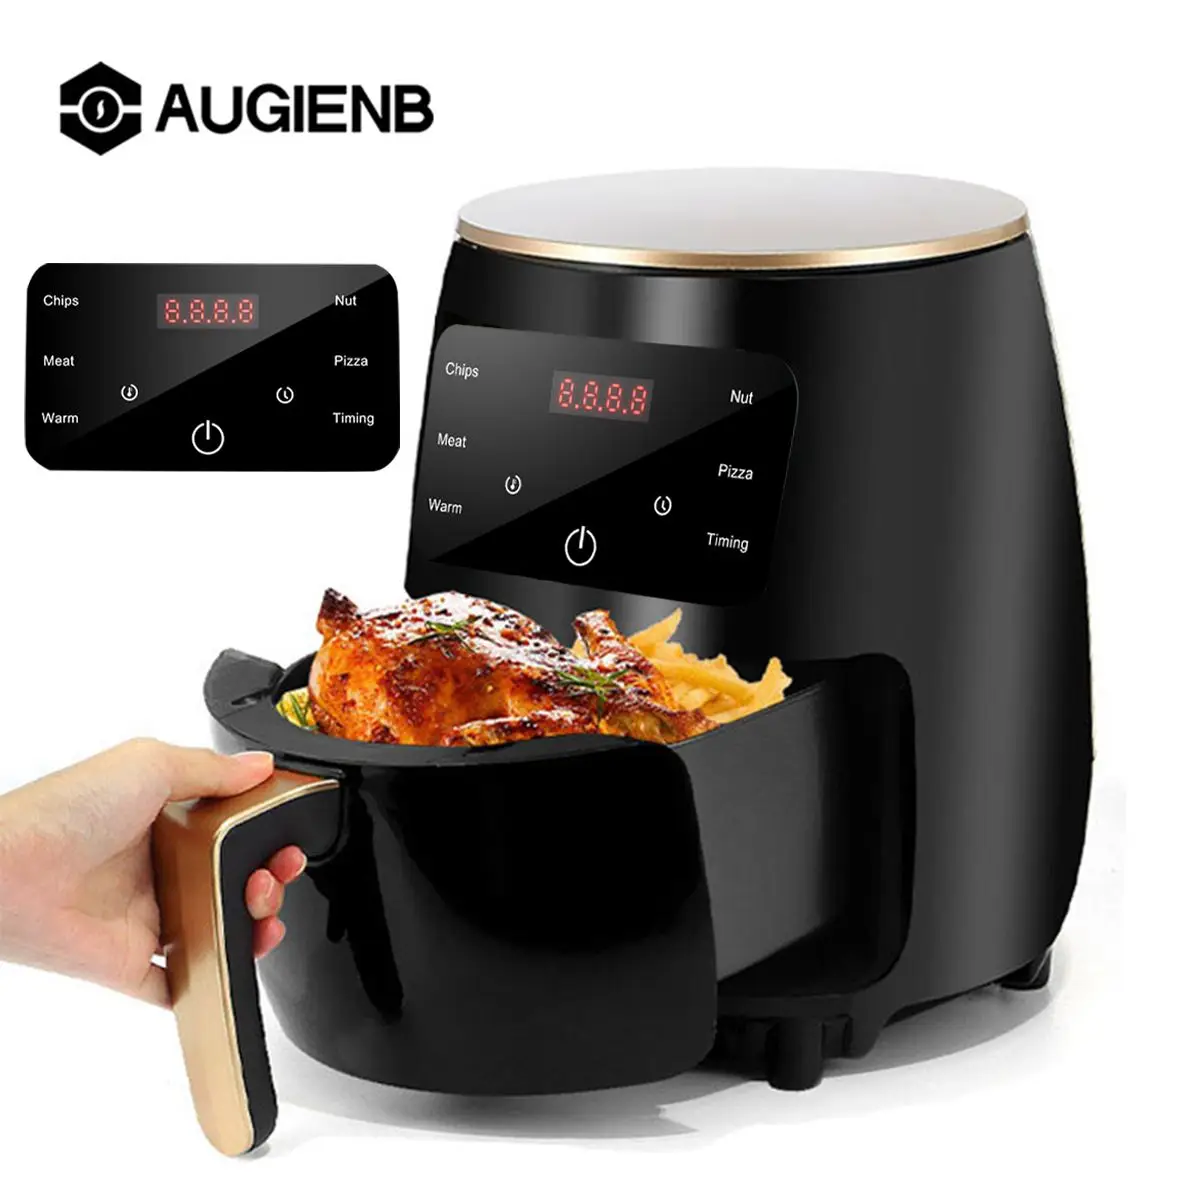 1400W Smart Air Fryer Electric Oilless Cooker with LCD Screen Operation PanelHome Large Capacity Multifunction Health Fryer